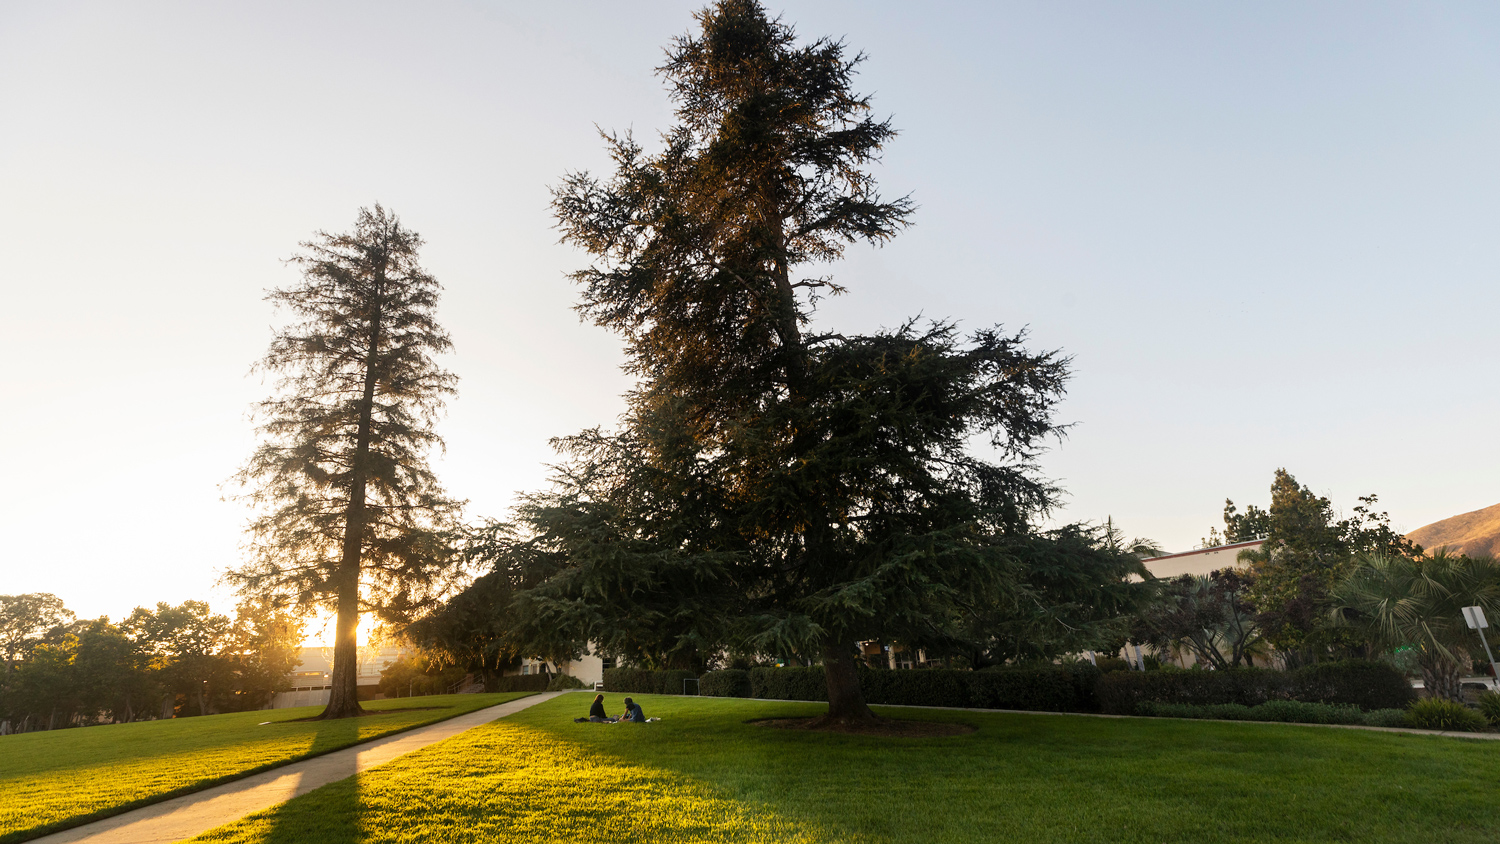 The sun sets over the trees on Dexter Lawn